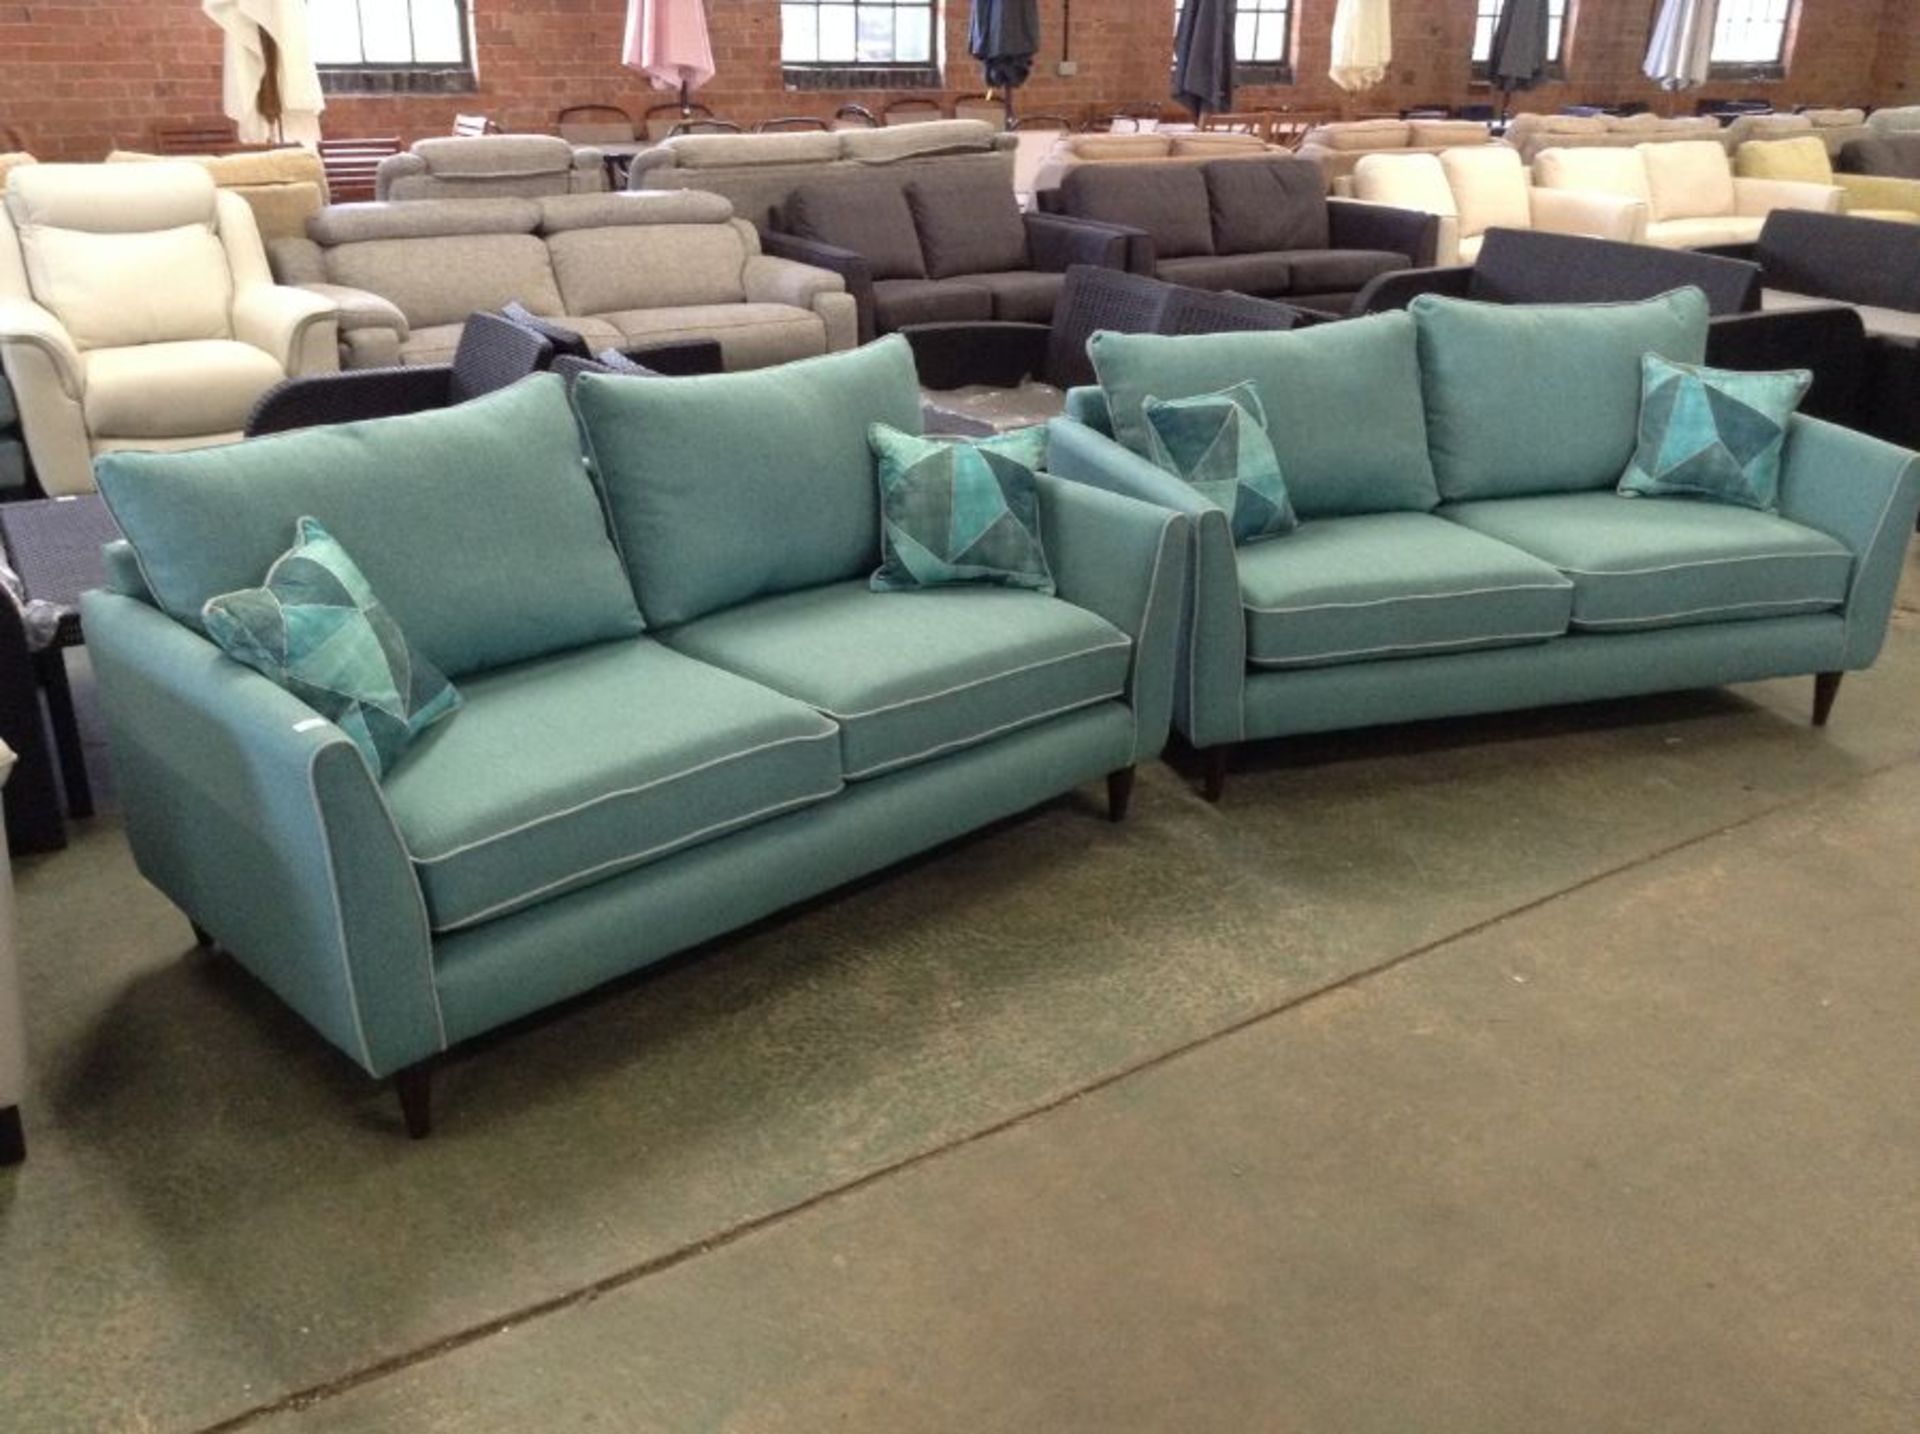 TEAL FABRIC 2 AND A HALF SEATER SOFAS X 2